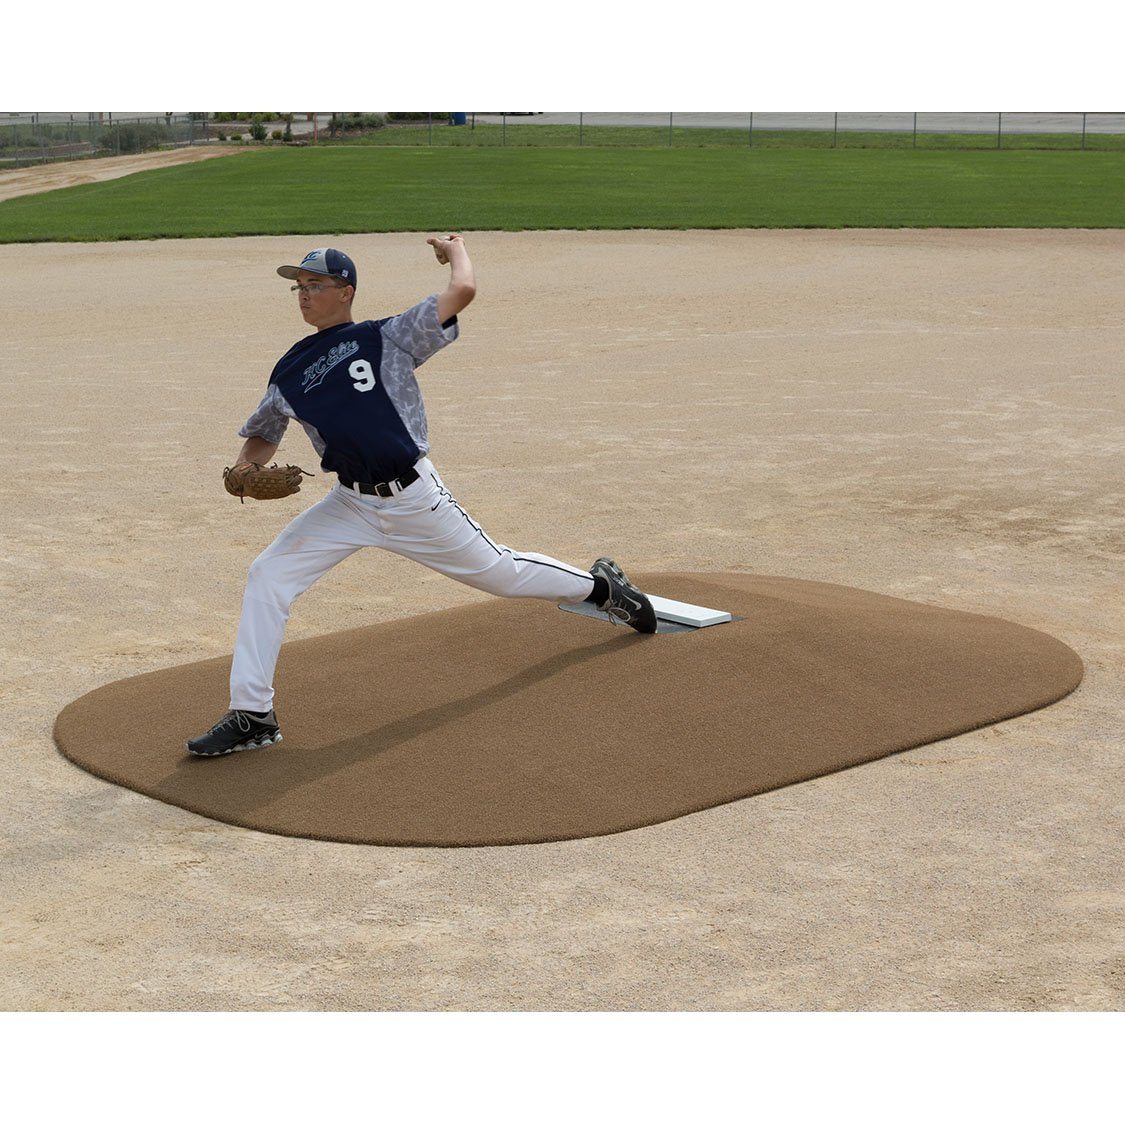 Pitch Pro 8121 Portable Adult Game Pitching Mound